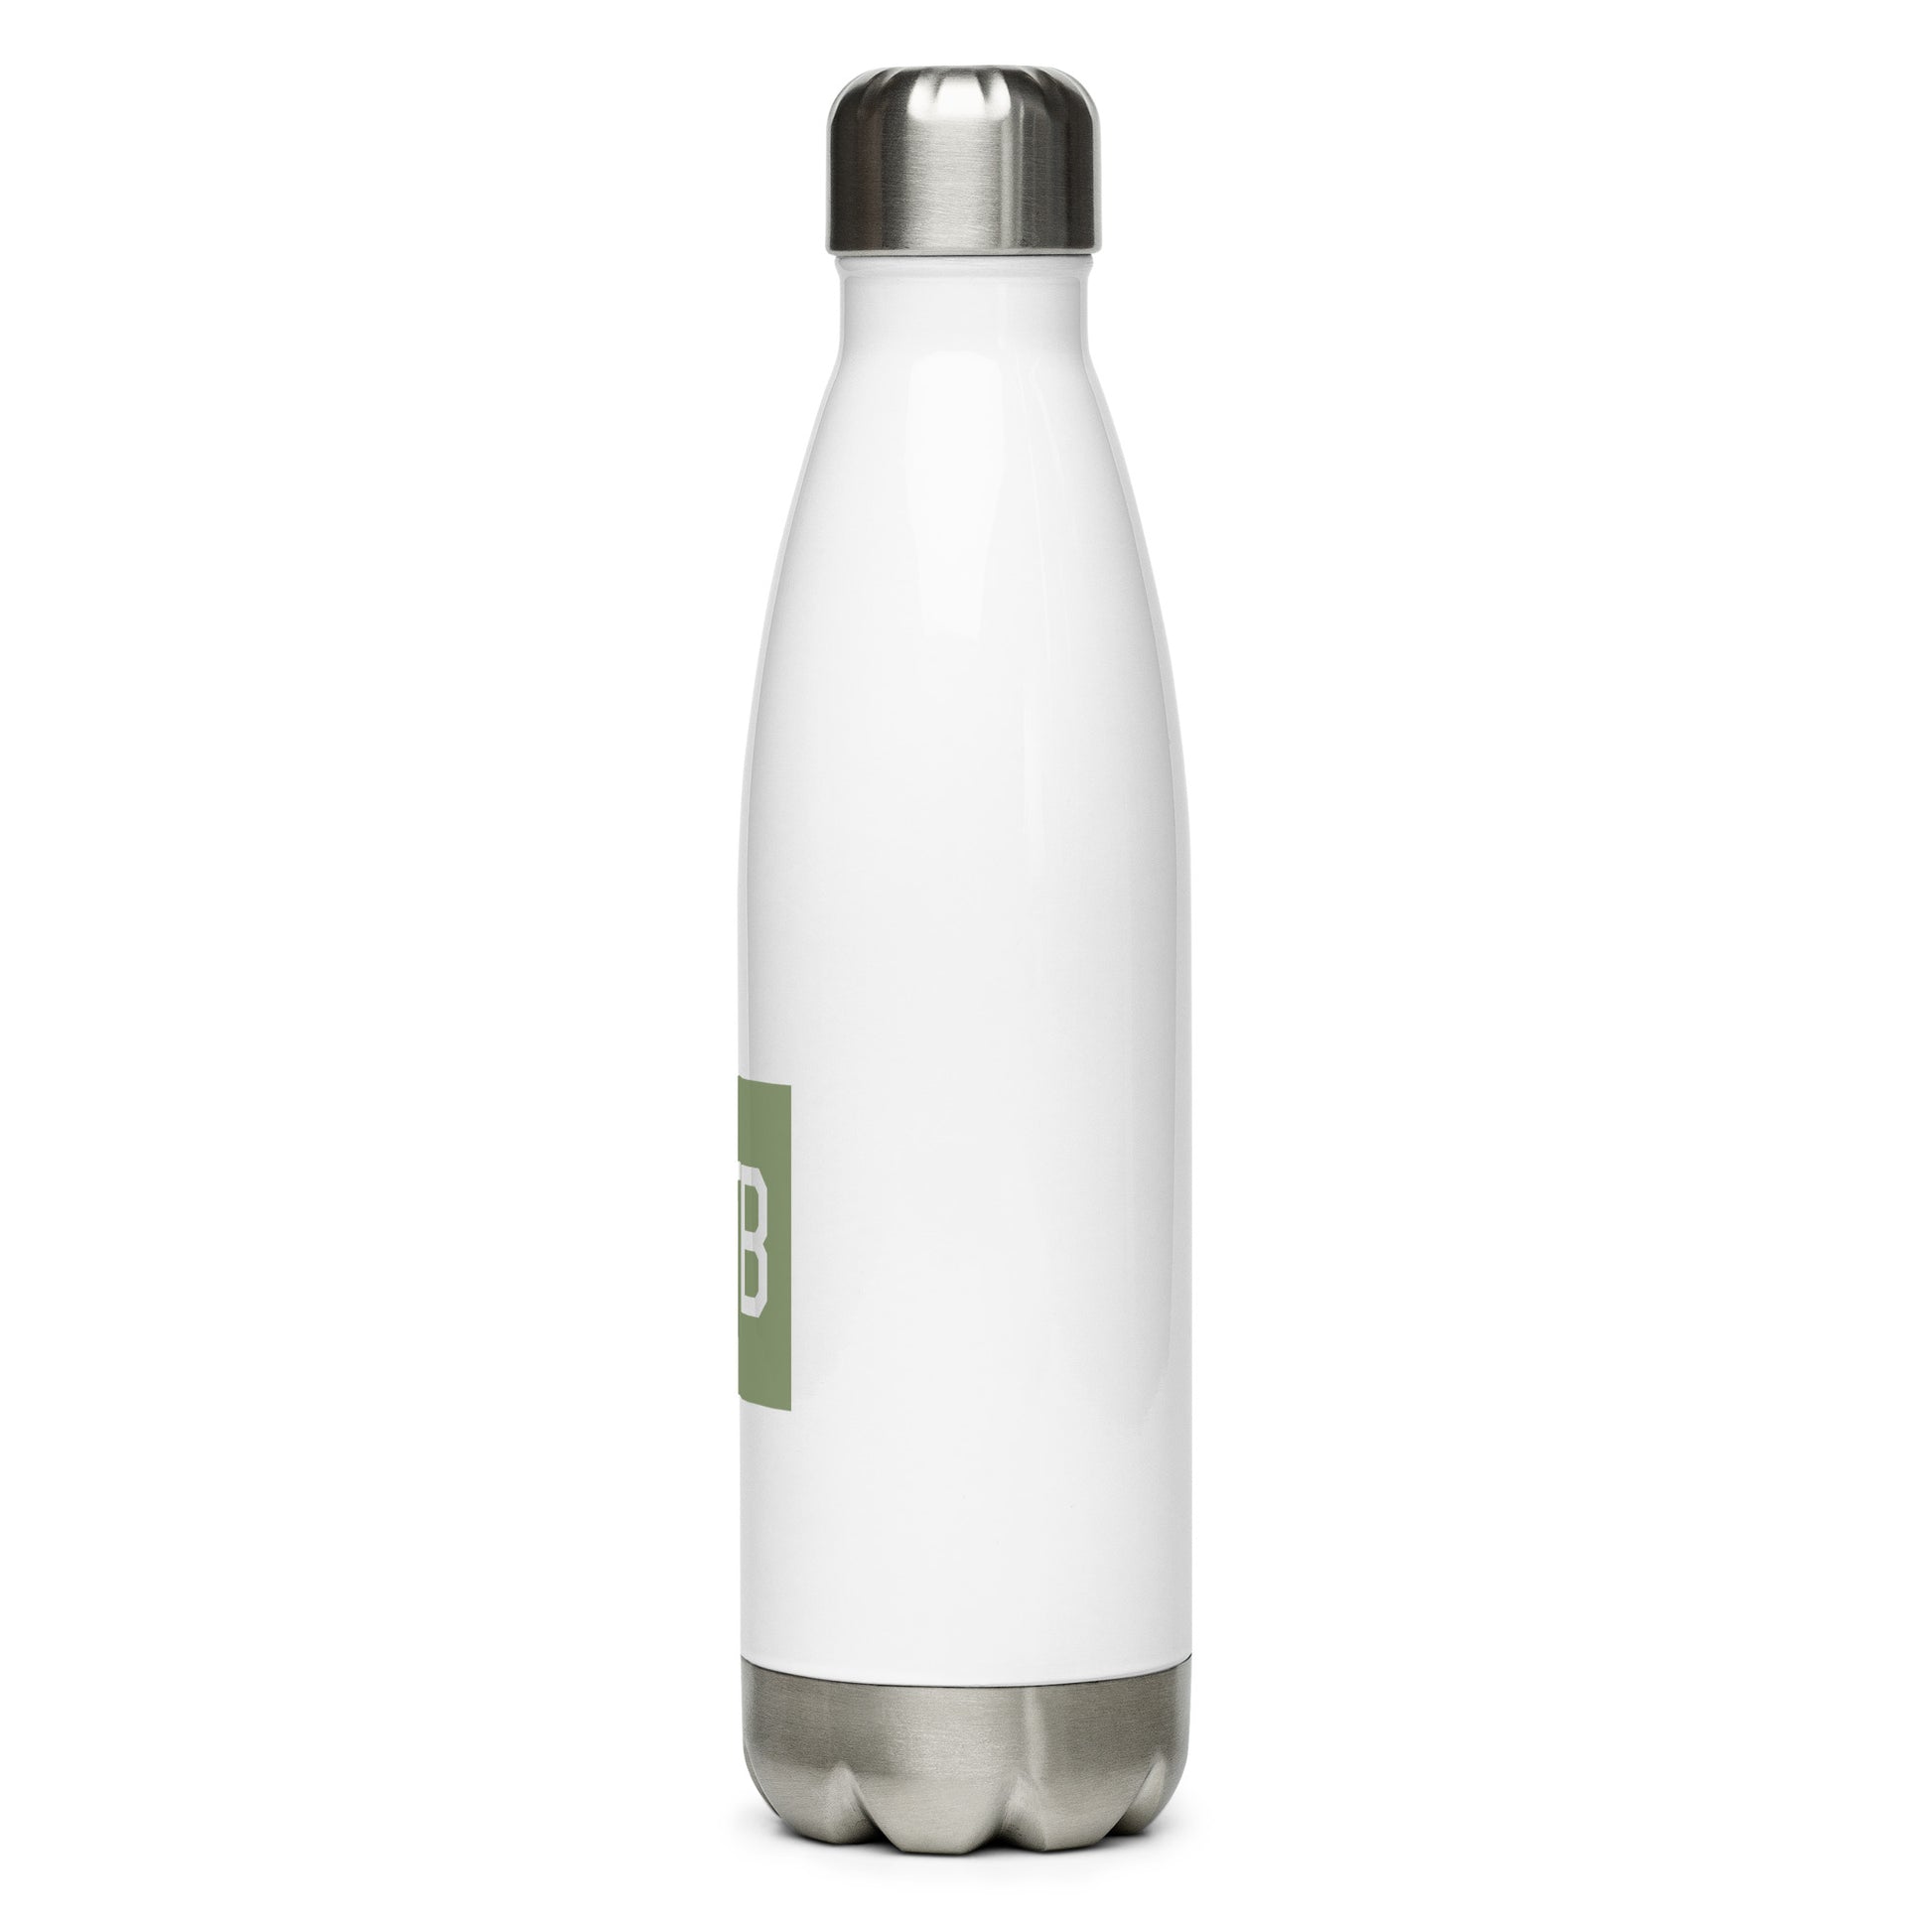 Aviation Gift Water Bottle - Camo Green • YFB Iqaluit • YHM Designs - Image 08